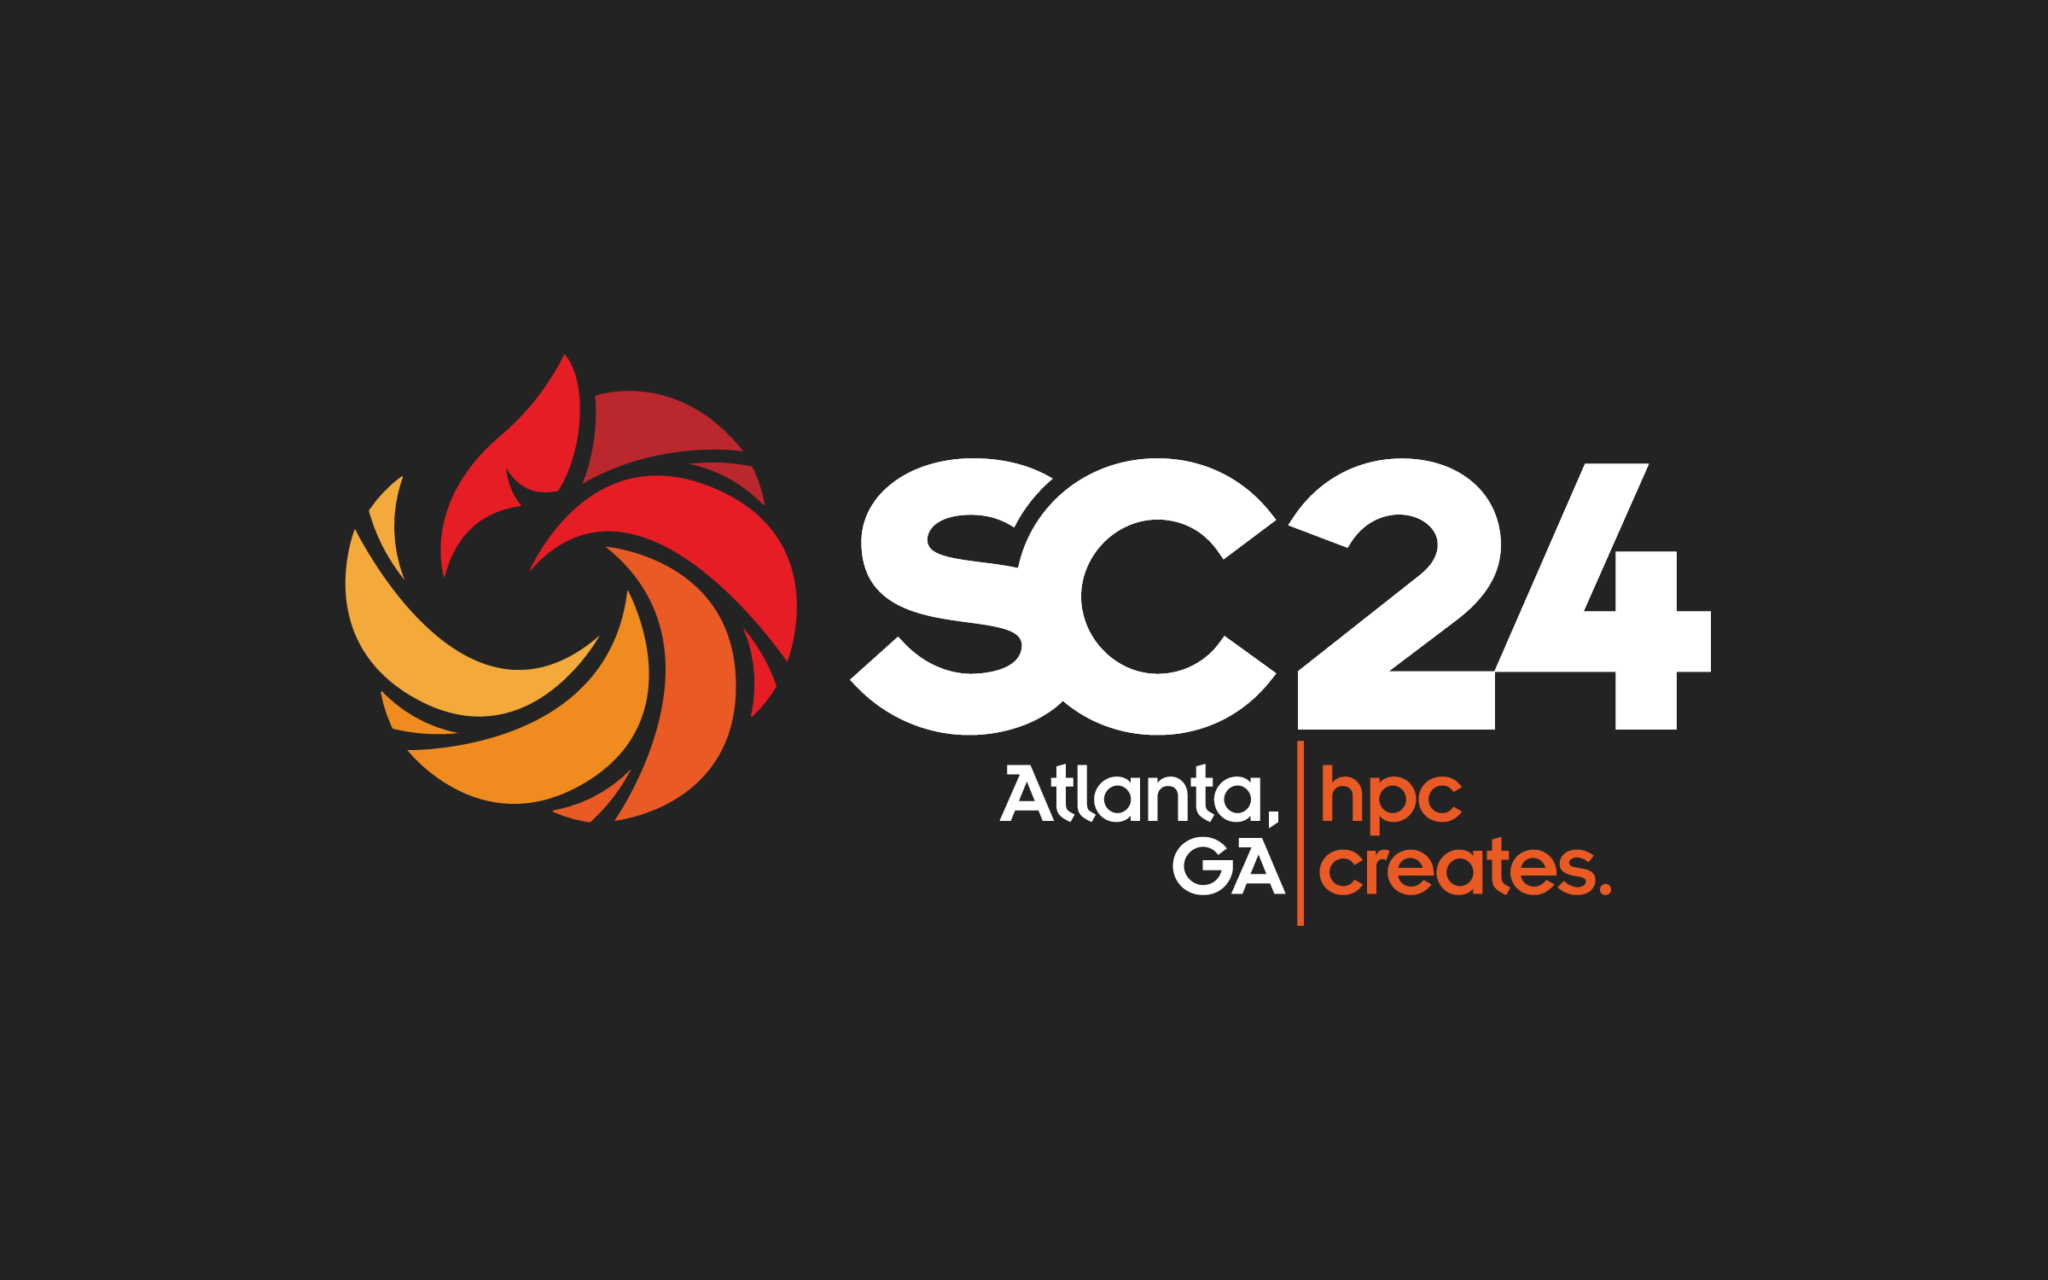 SC24 is in Atlanta this year!